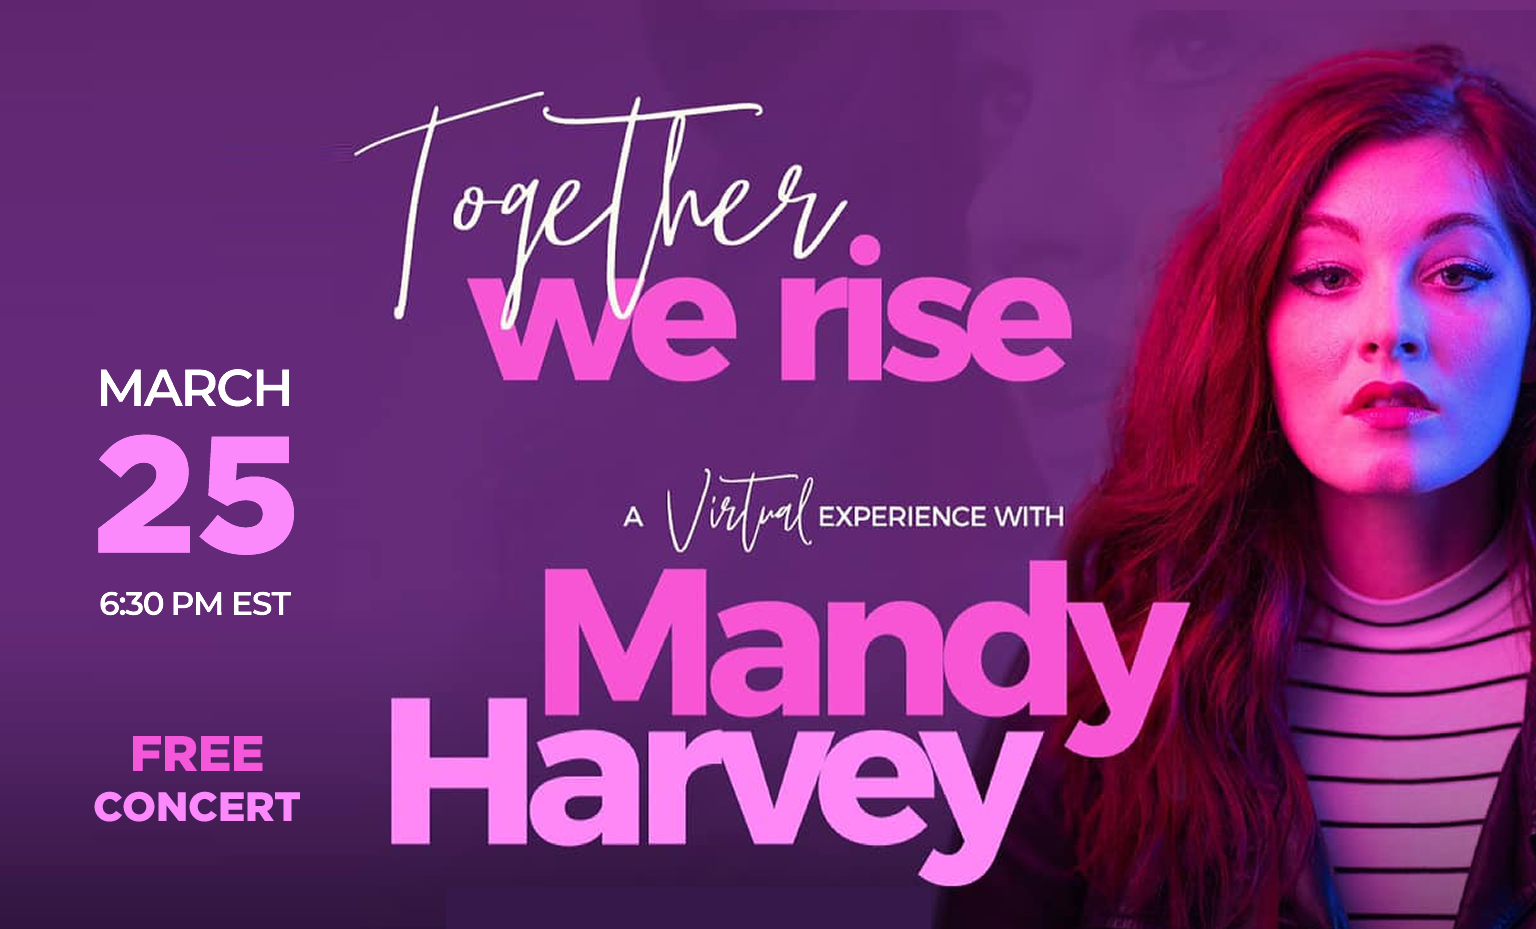 You are currently viewing Together We Rise, a Virtual Concert with Mandy Harvey